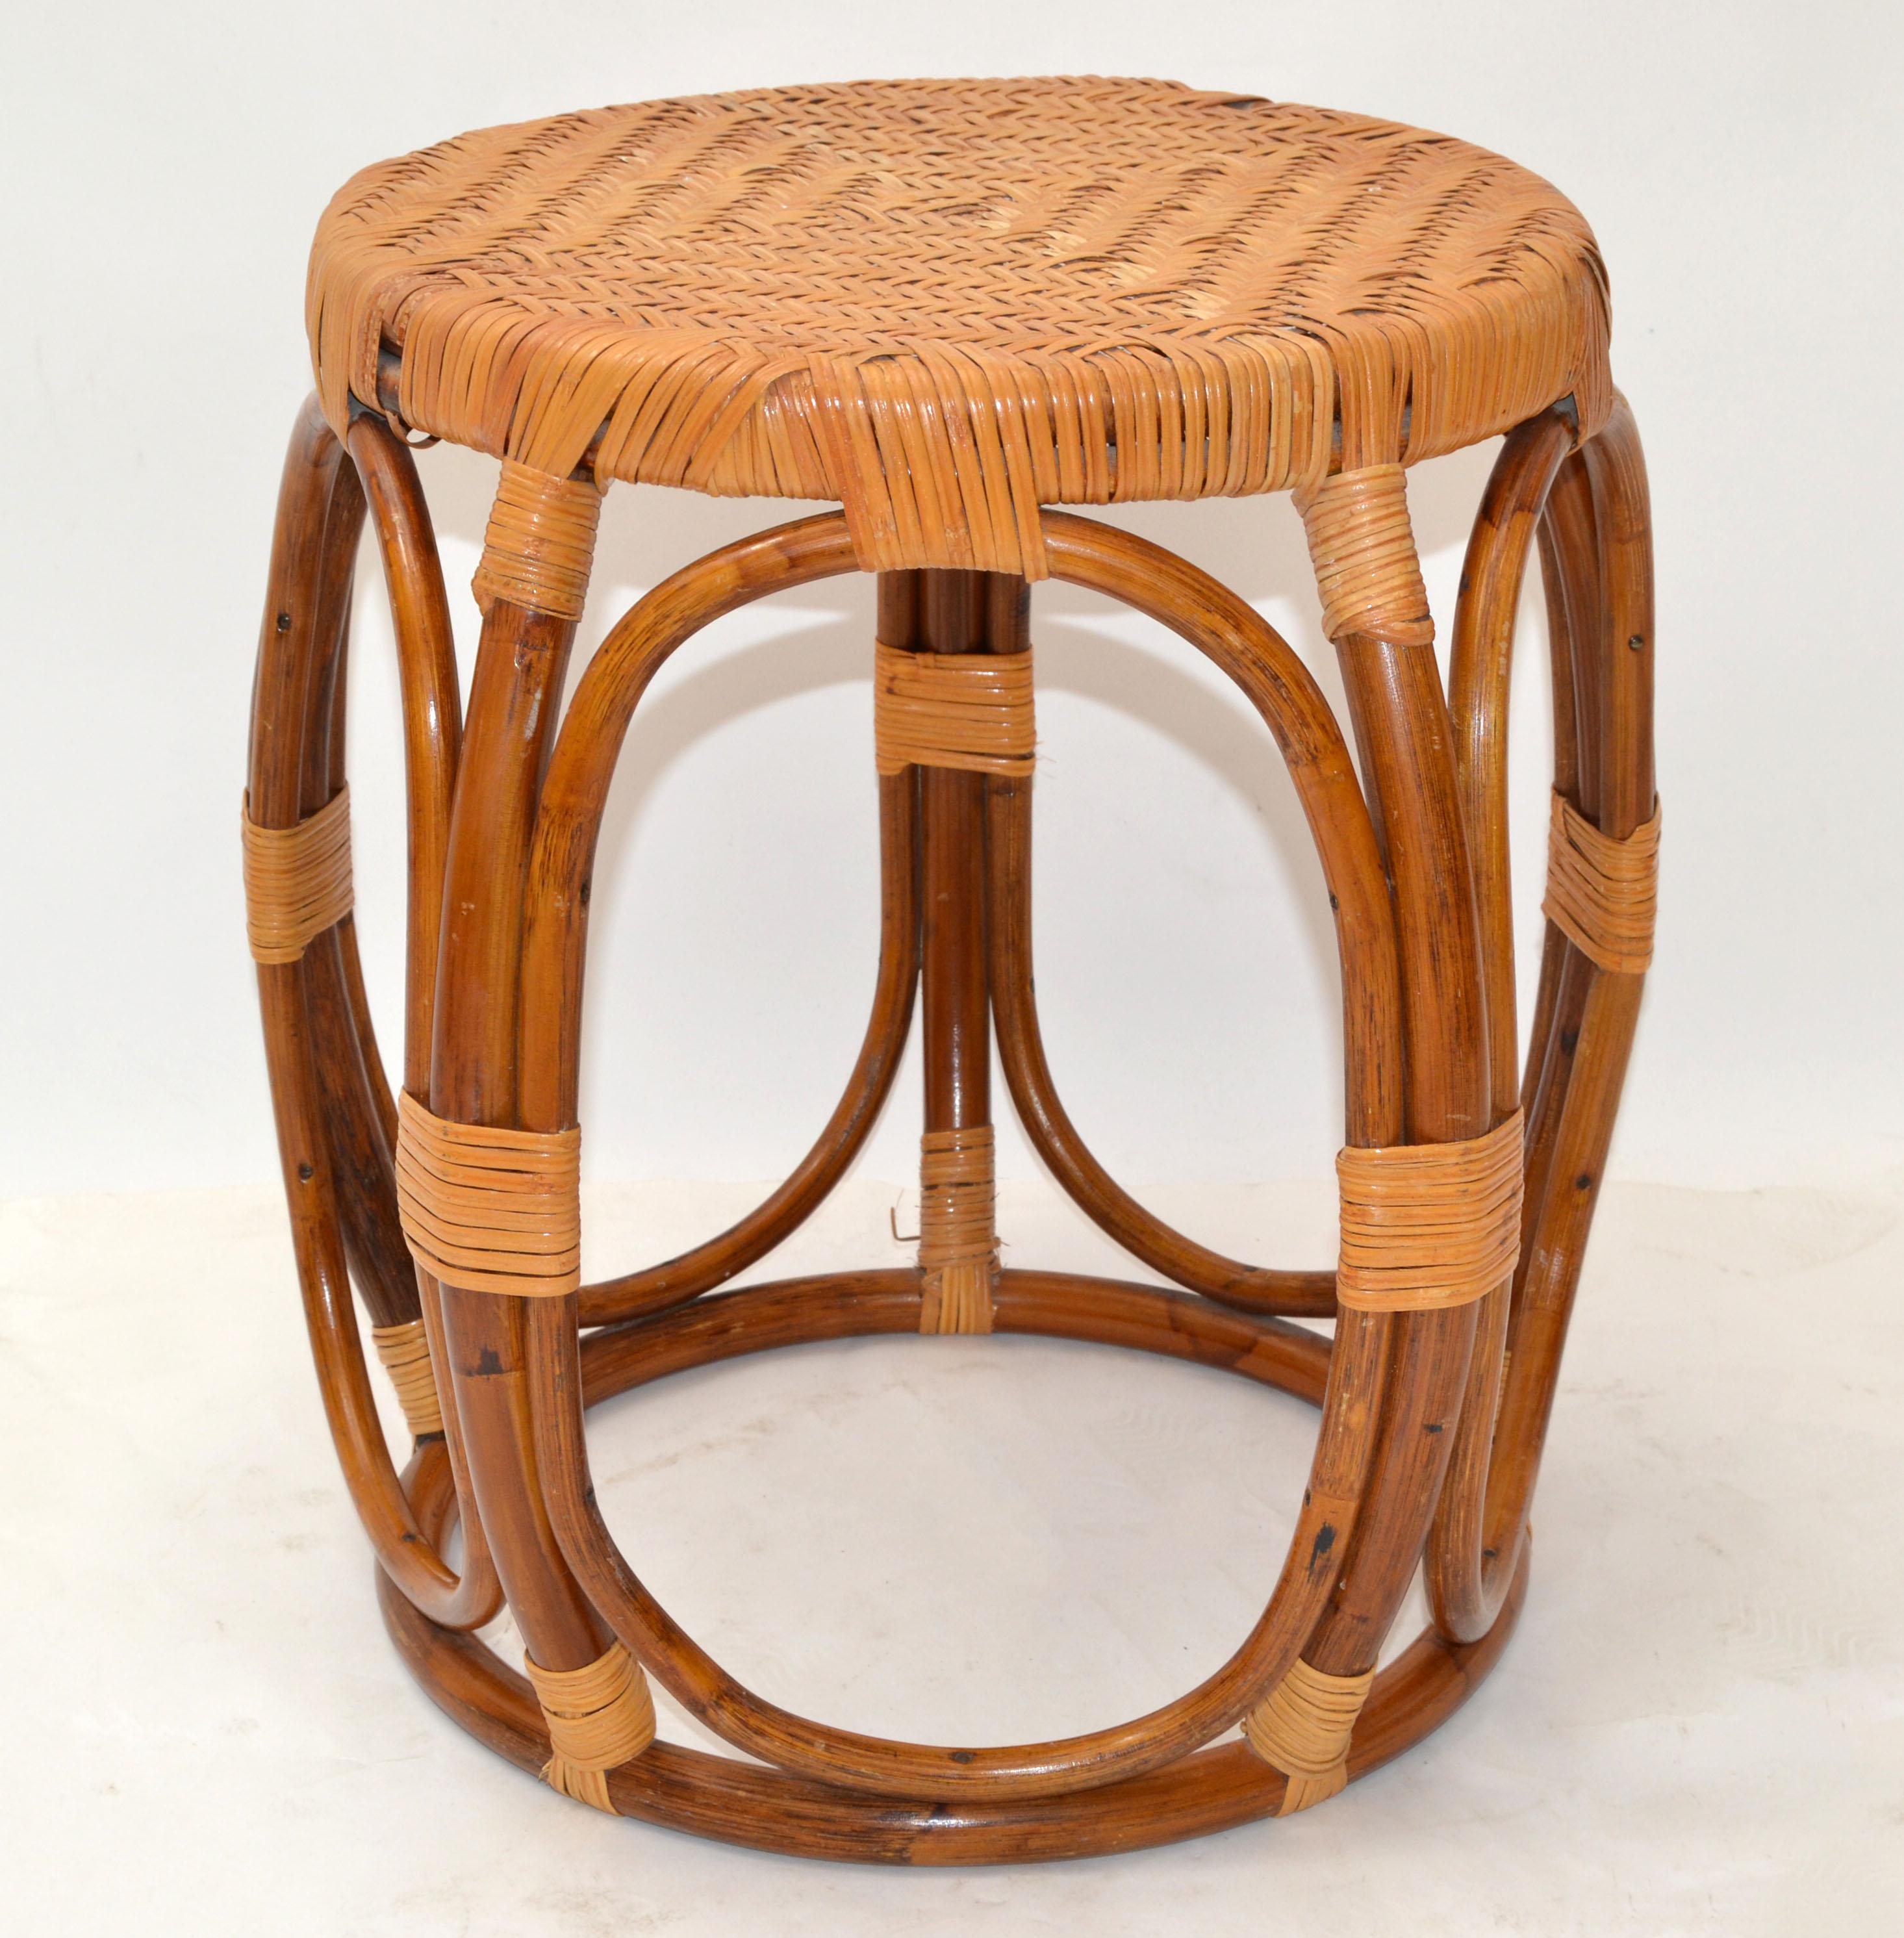 Hand-Woven Vintage Midcentury Round Handwoven Rattan / Wicker Drum, Side, Drink Table Stool